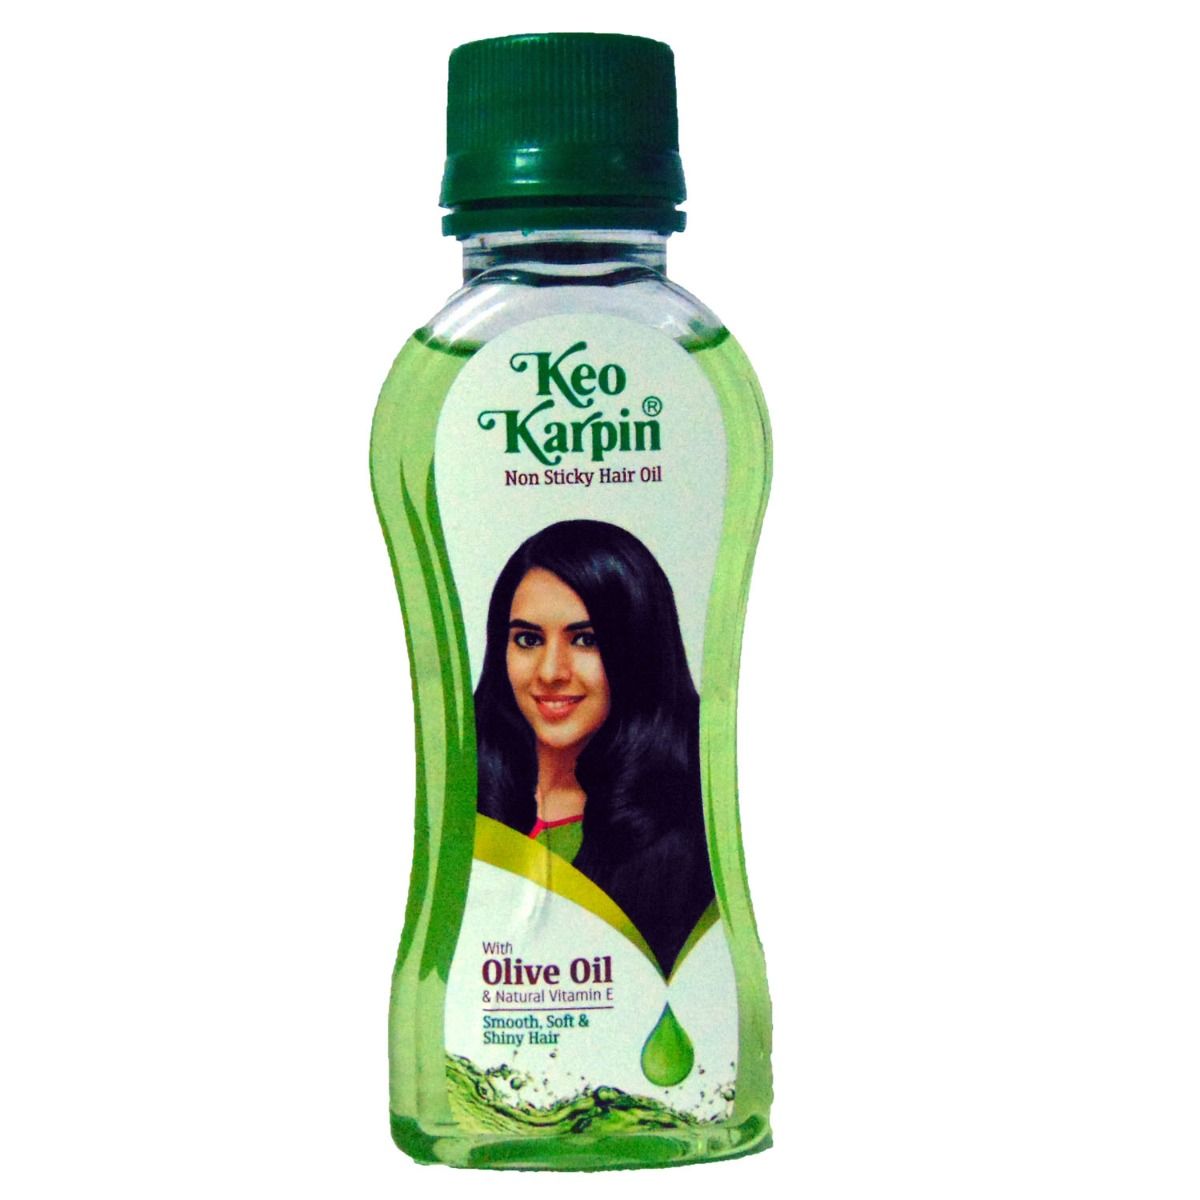 Keo Karpin Non Sticky Hair Oil, 100 ml Price, Uses, Side Effects,  Composition - Apollo Pharmacy